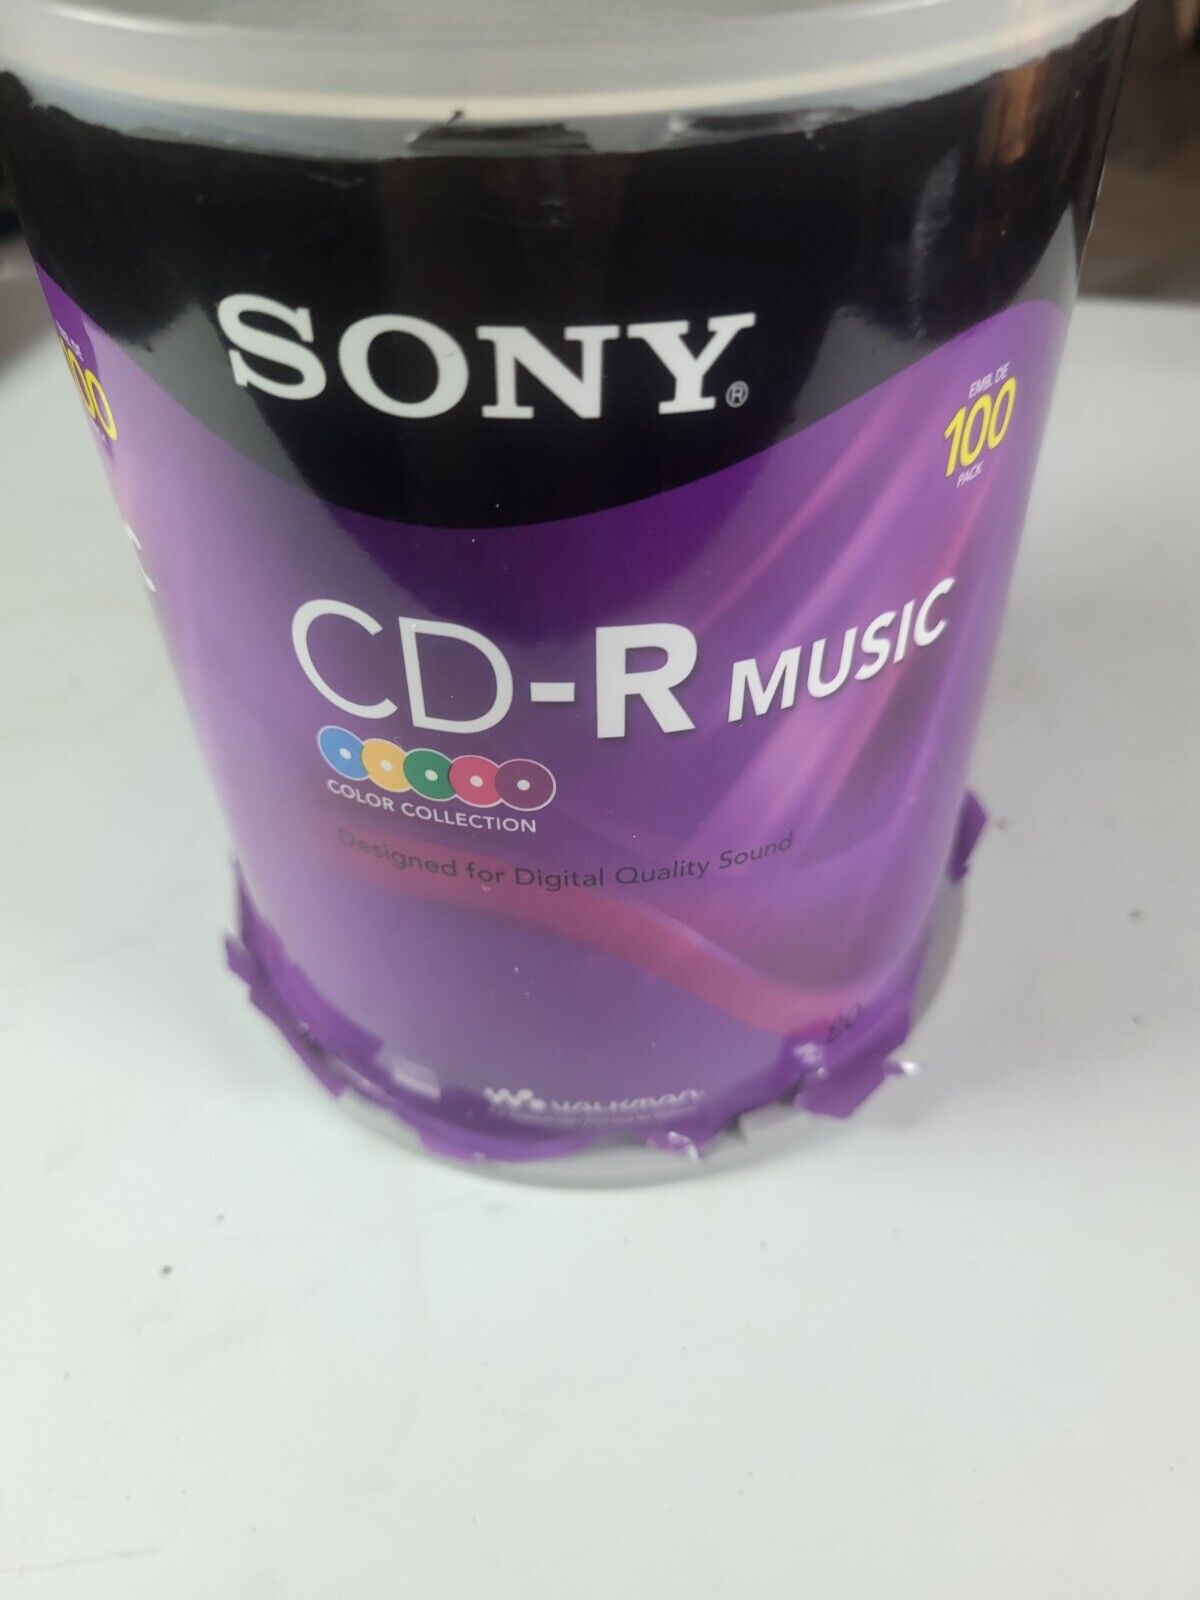 Sony 100CRM80RSX 80 min CD-R Music Discs - 100 Count